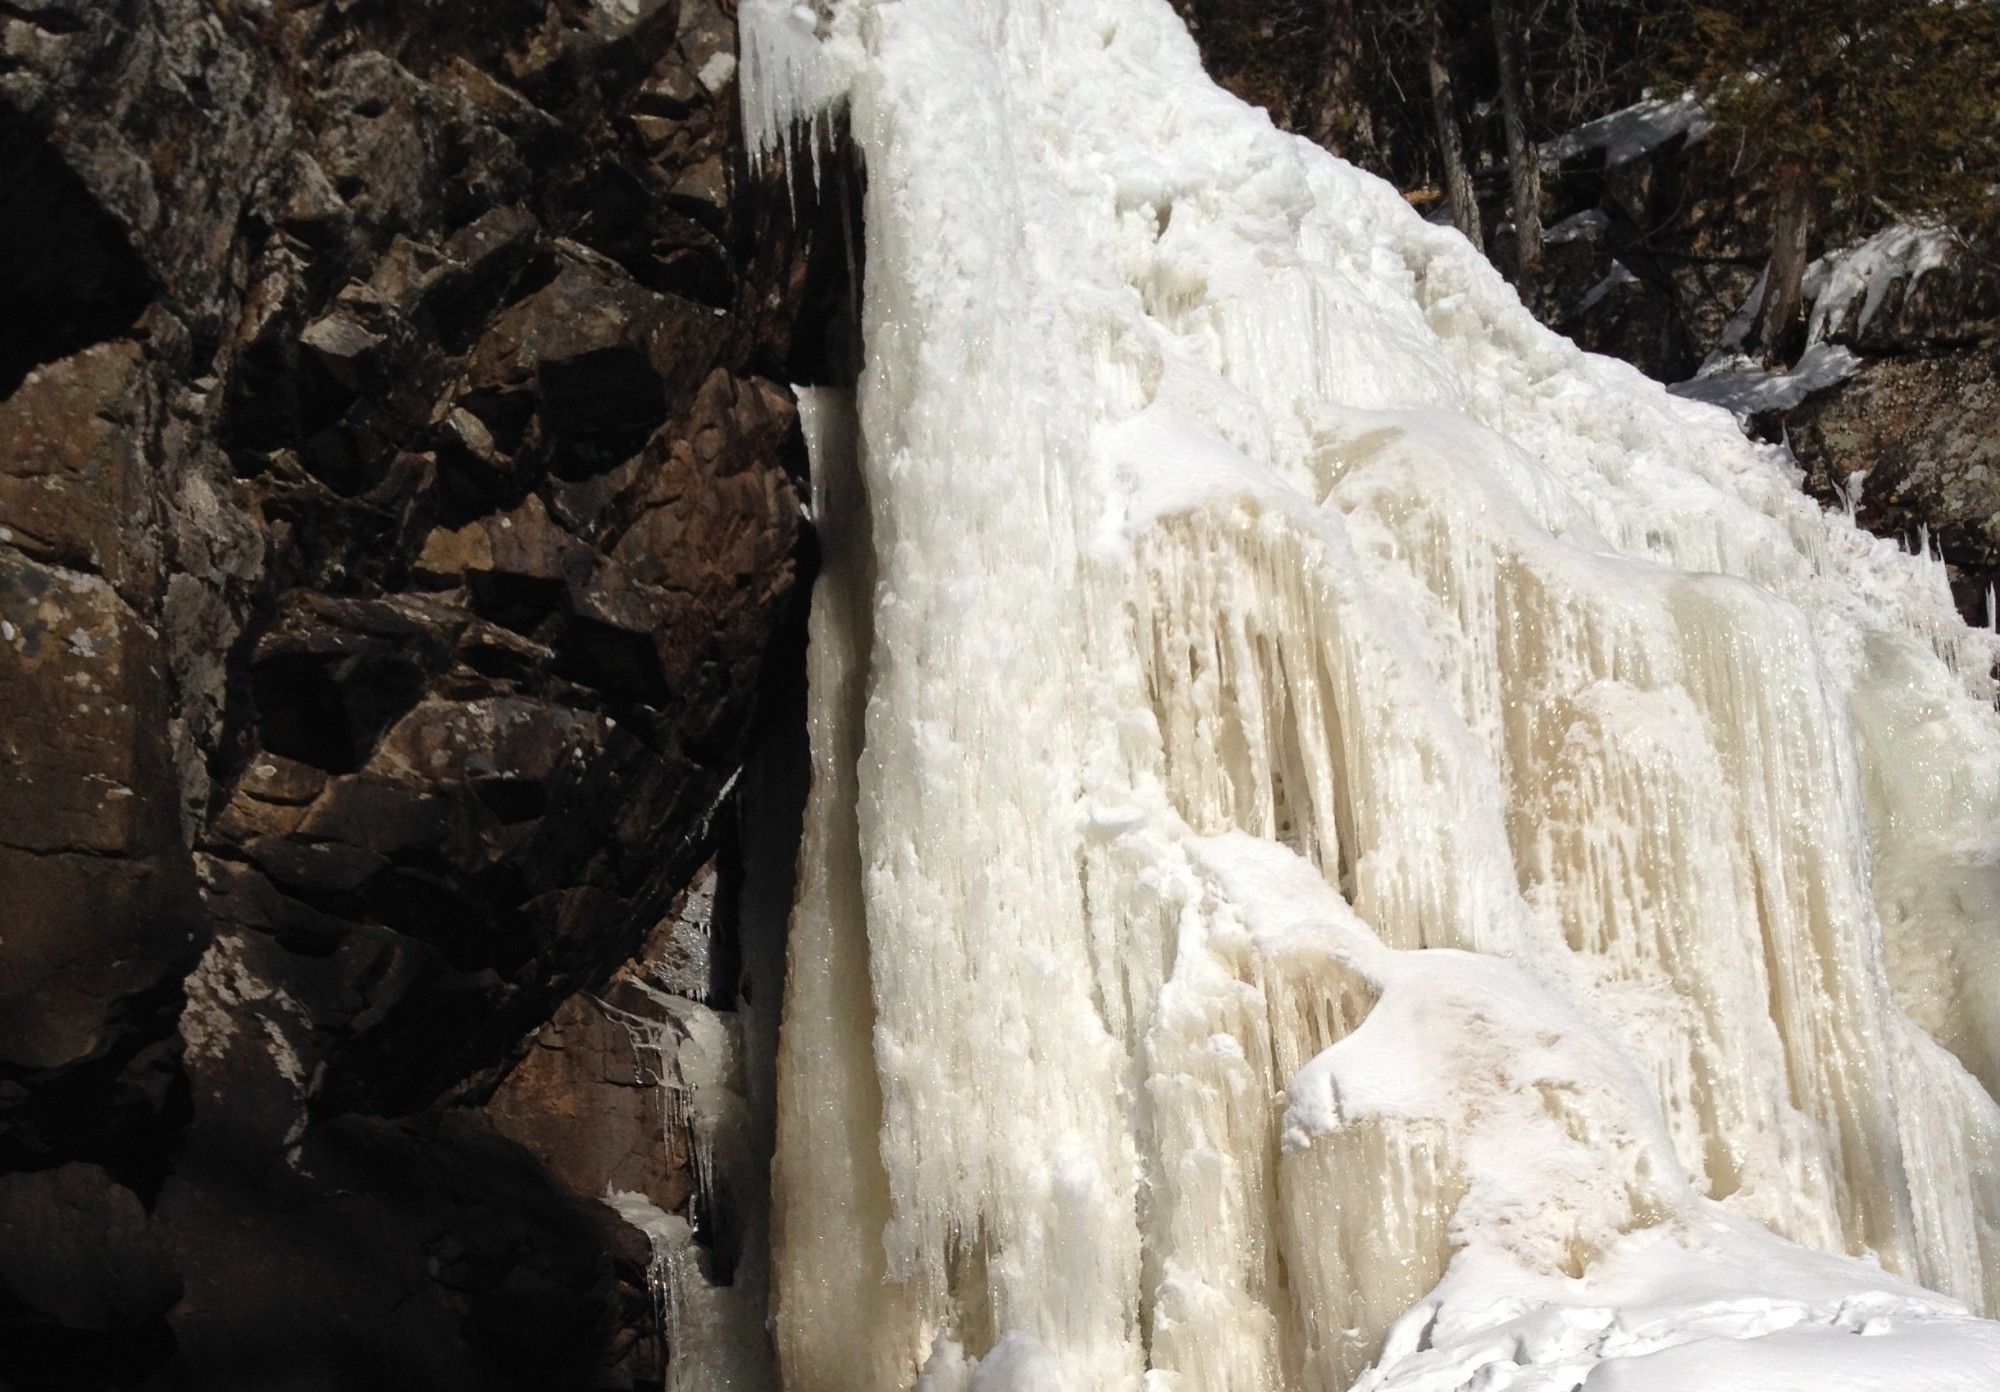 snowshoeing Lanaudiere region, Quebec: frozen waterfall at Chute-A-Bull Regional Park in Quebec